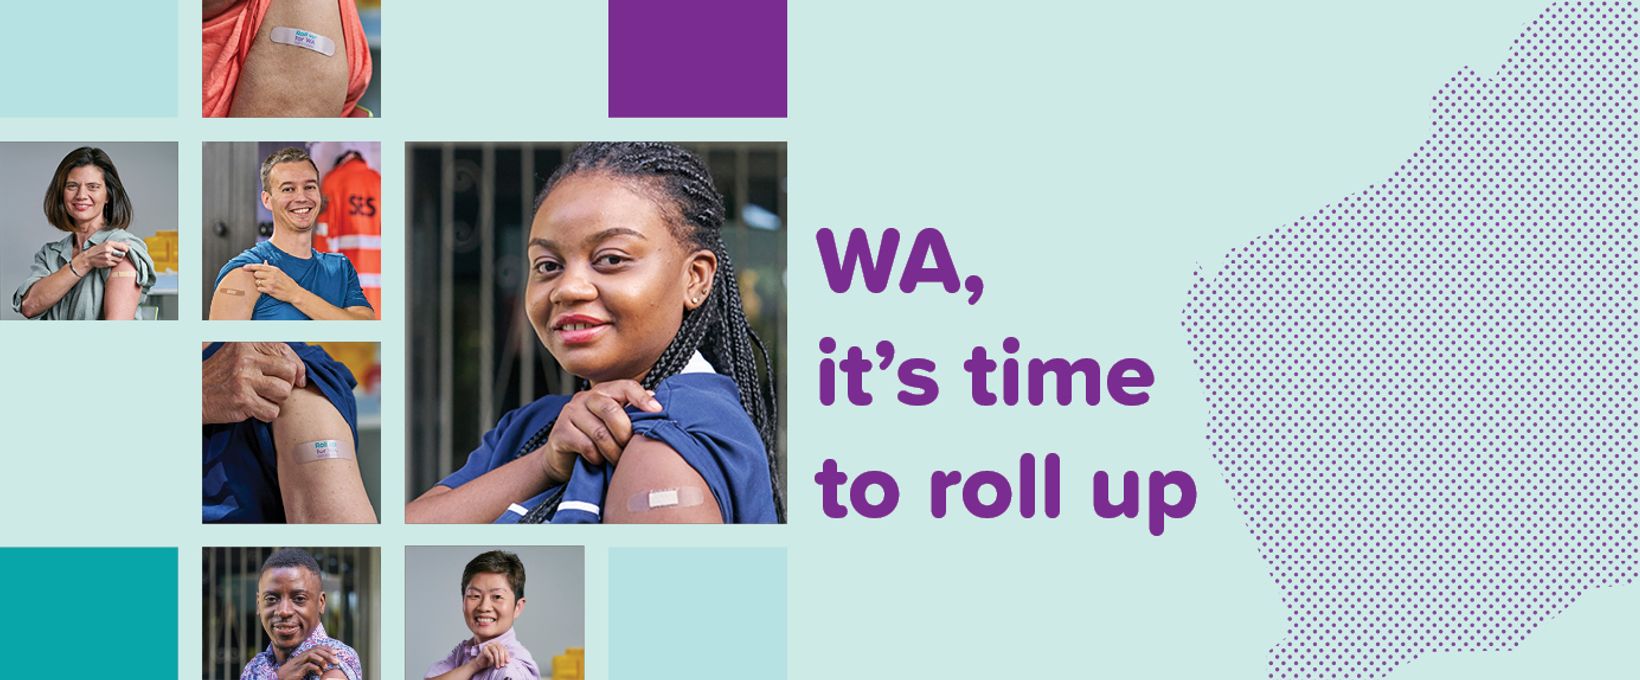 Roll up for WA banner graphics and images of people who have had a vaccine